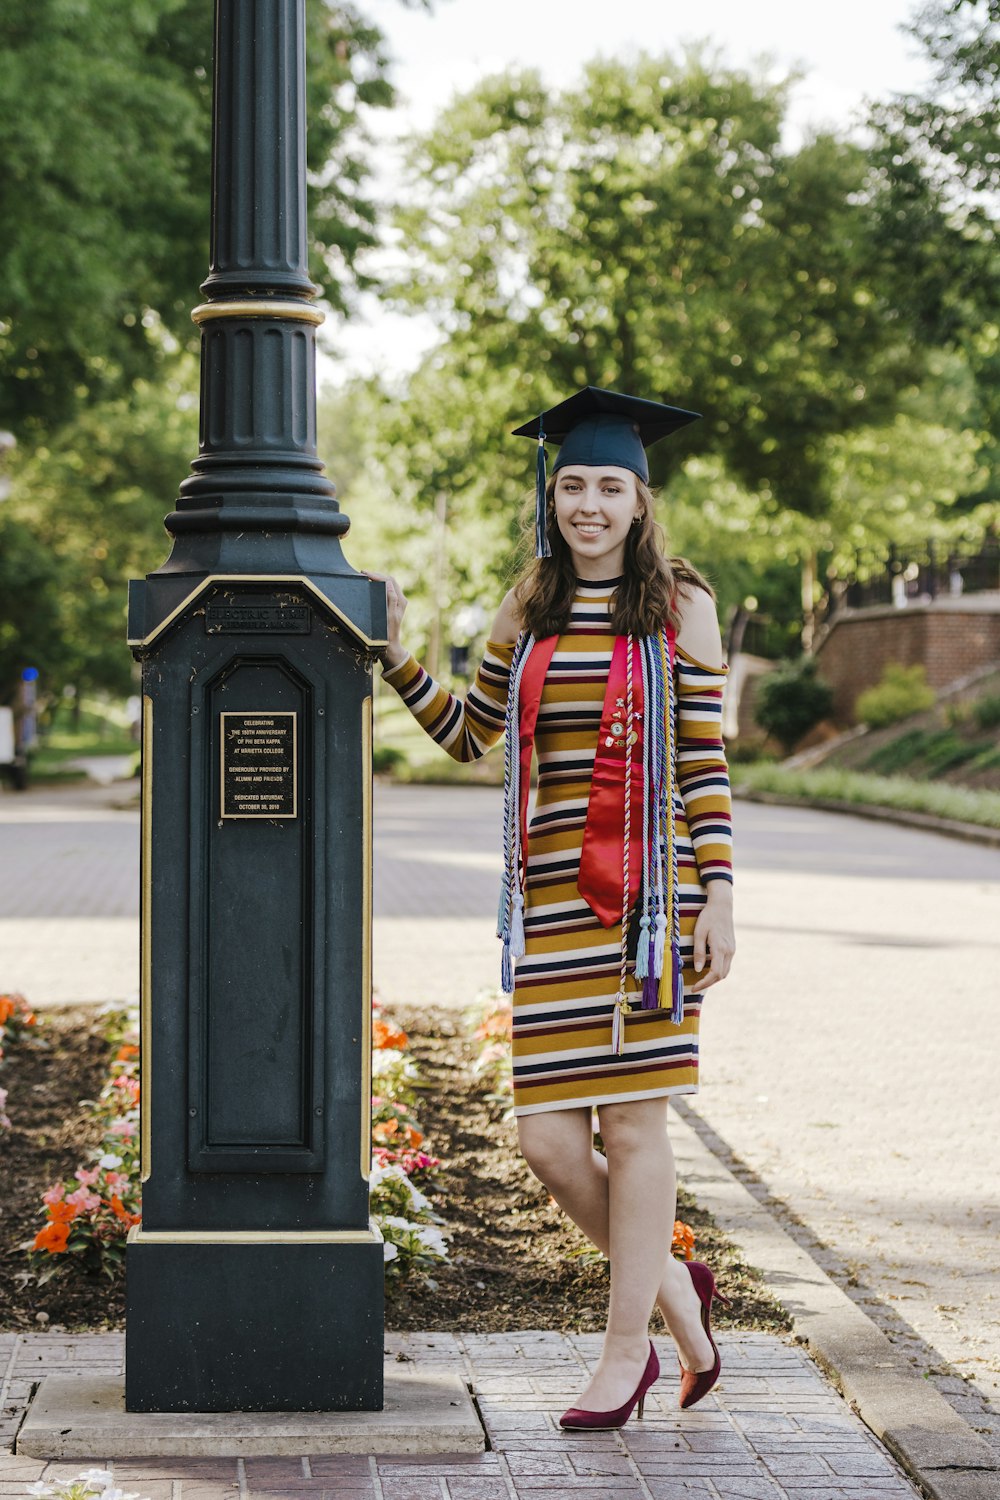 woman in black academic dress and black mortar board standing on sidewalk during daytime